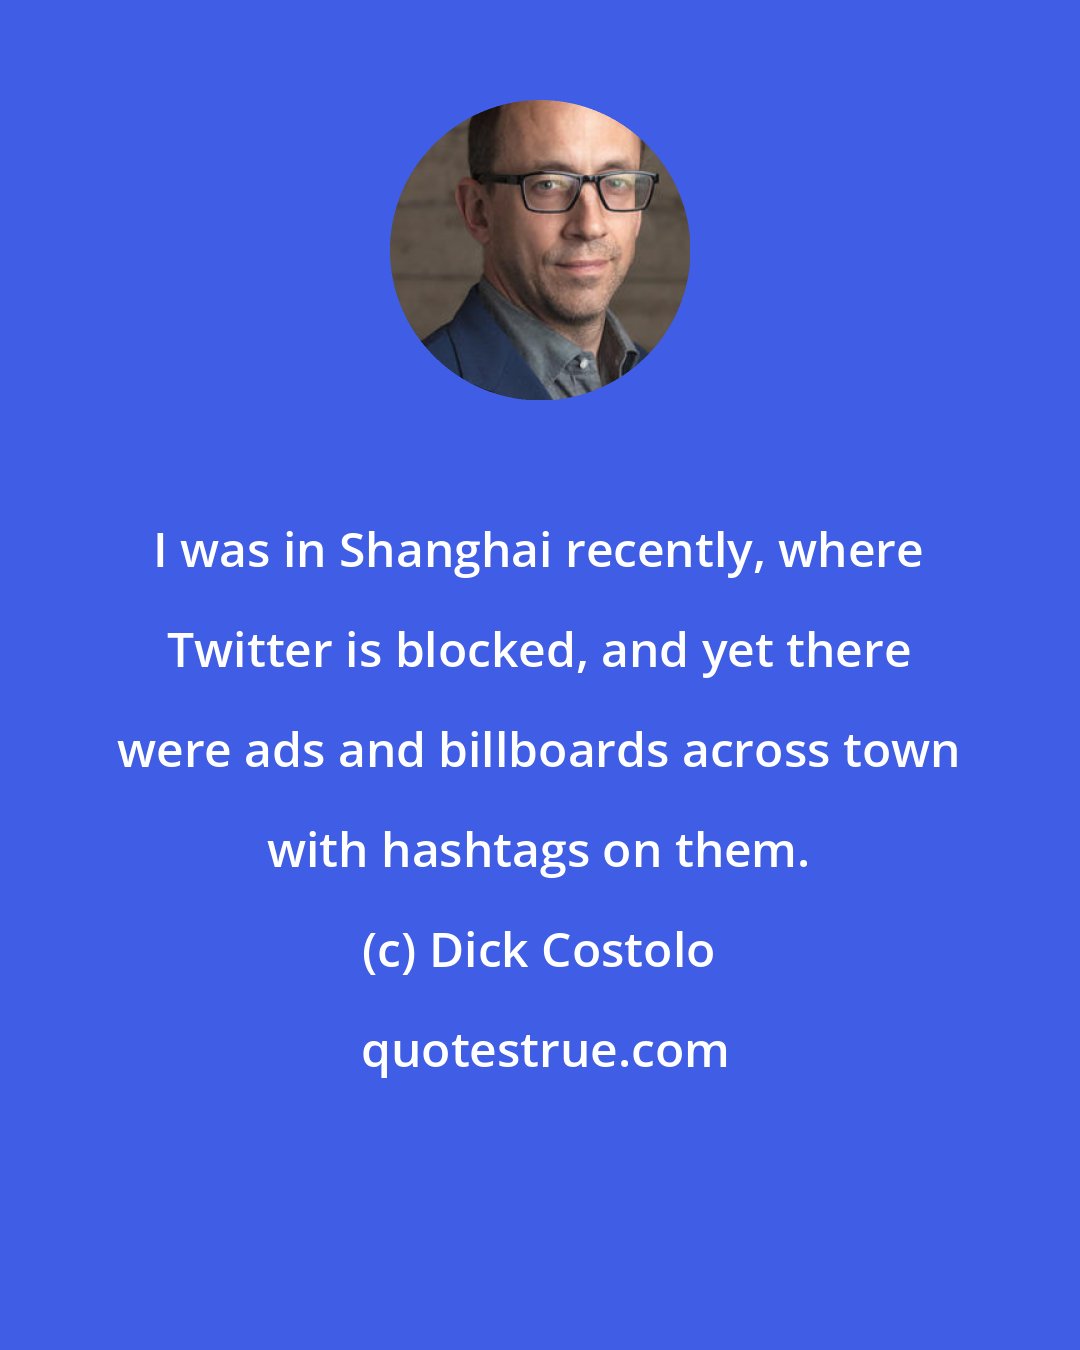 Dick Costolo: I was in Shanghai recently, where Twitter is blocked, and yet there were ads and billboards across town with hashtags on them.